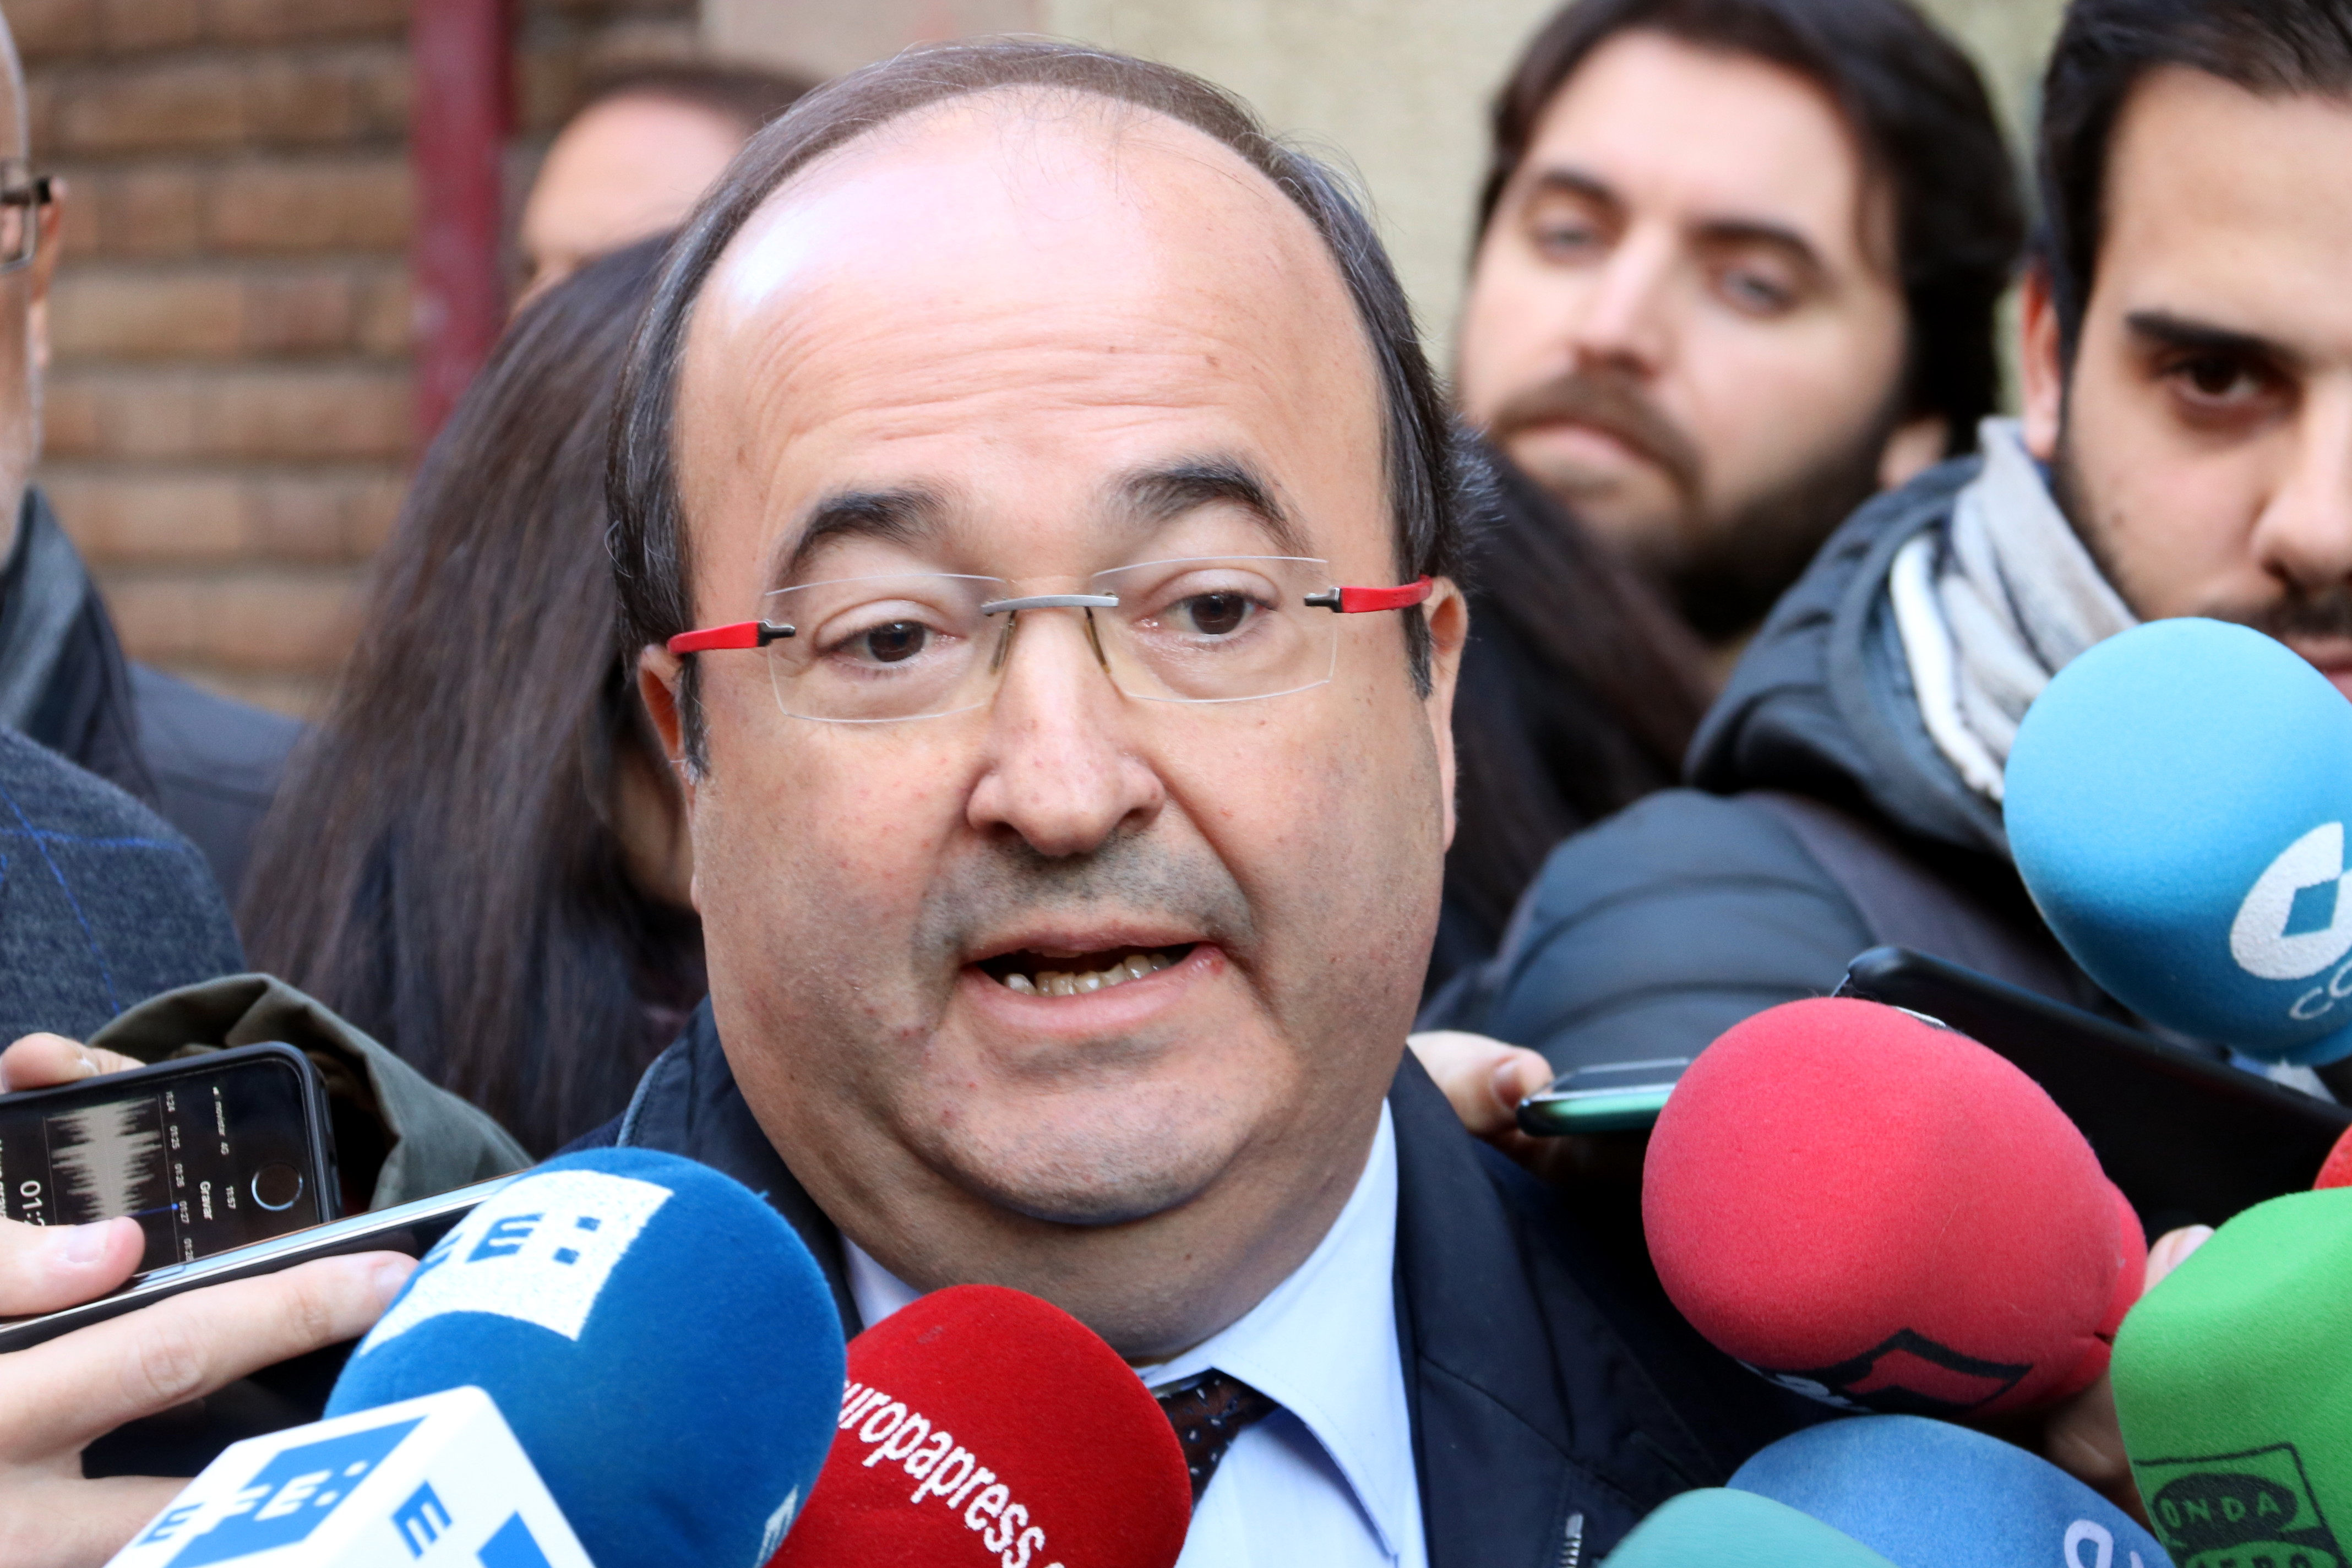 Catalan Socialists leader and candidate Miquel Iceta speaking to the press on November 30 (by Maria Belmez)